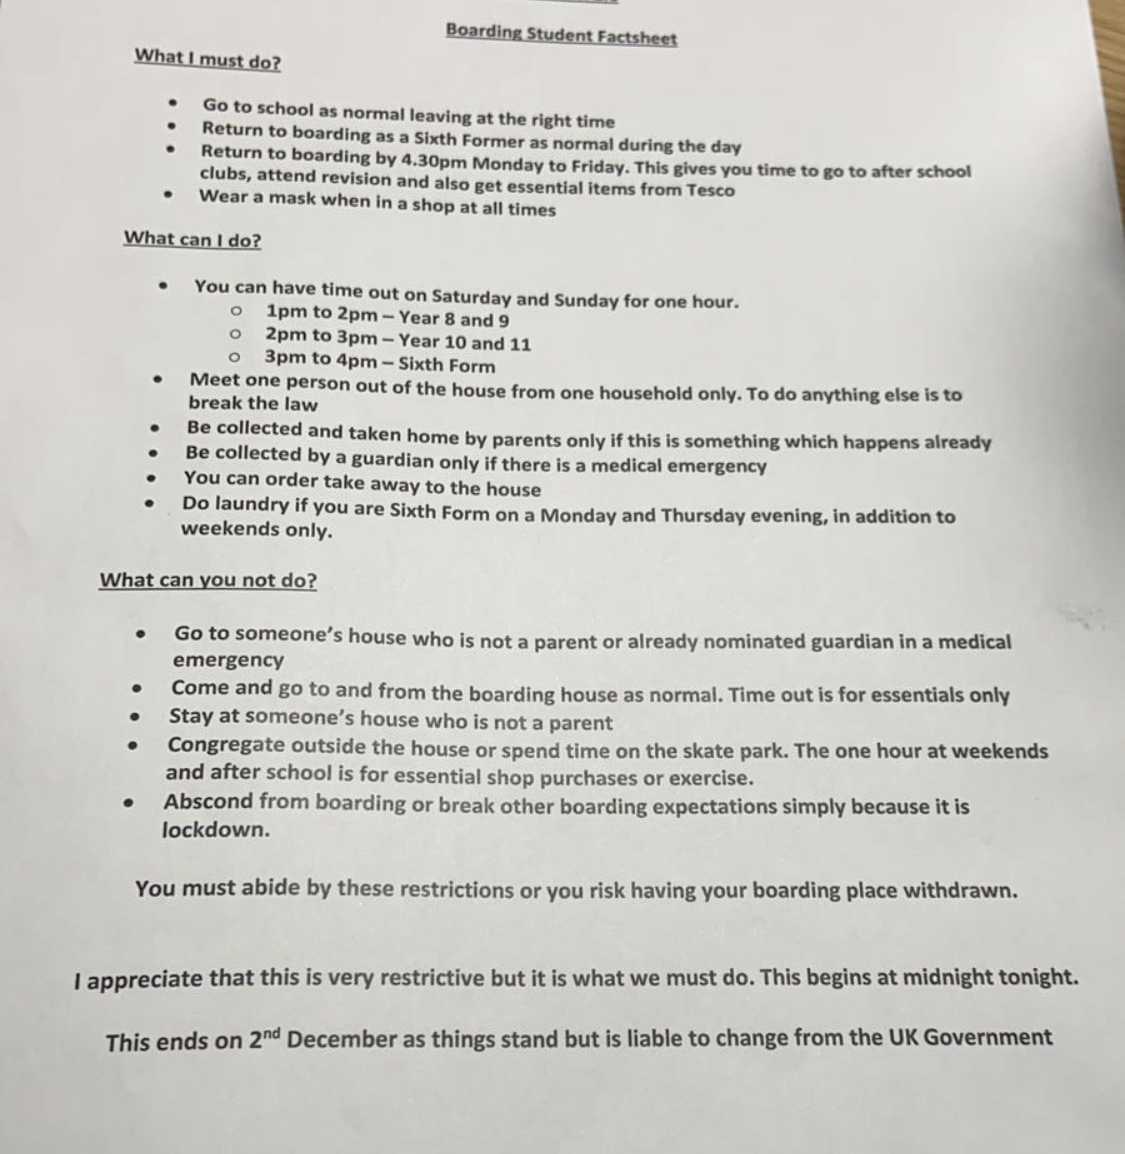 I have been sent this by a concerned parent of a sixth former at a boarding school, who was sent it in turn. It is atrocious and would appear to amount to false imprisonment. It is all too typical of schools and universities so I use it to illustrate the gravity of this problem.